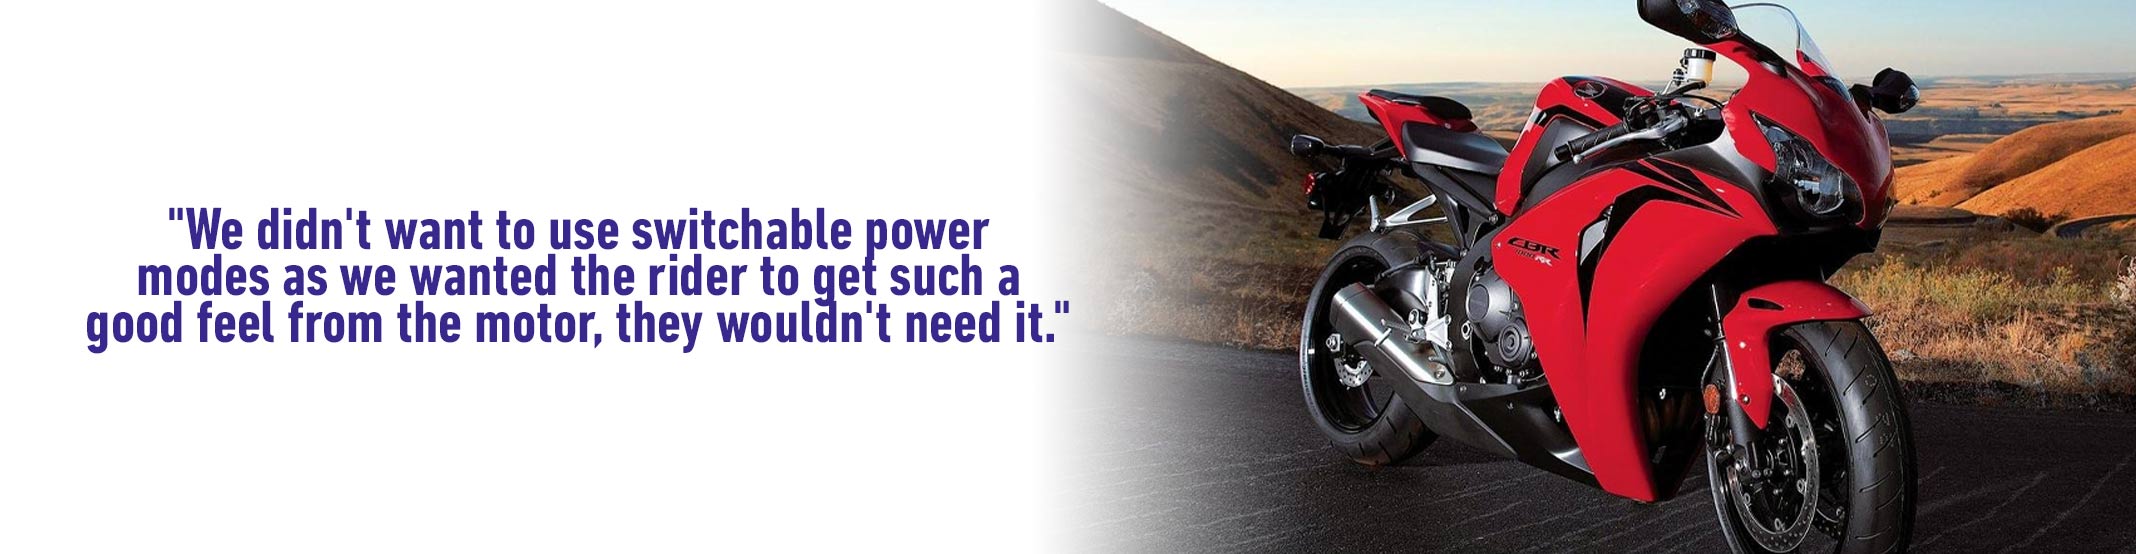 Flame on with the FireBlade - Fireblade CBR1000RR-RR - quote and bike photo